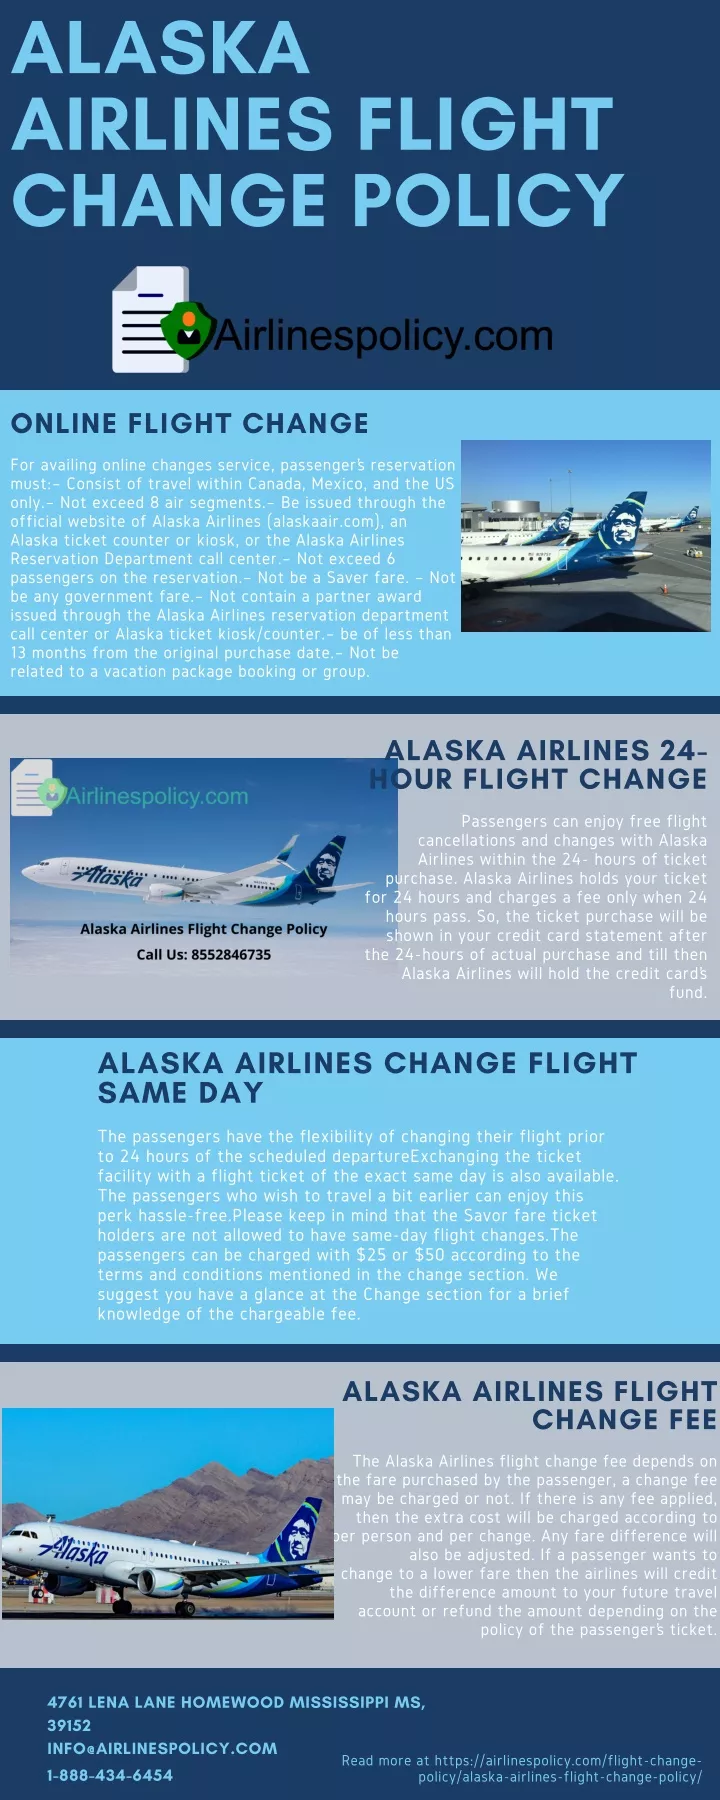 PPT Alaska Airlines Flight Change Policy PowerPoint Presentation